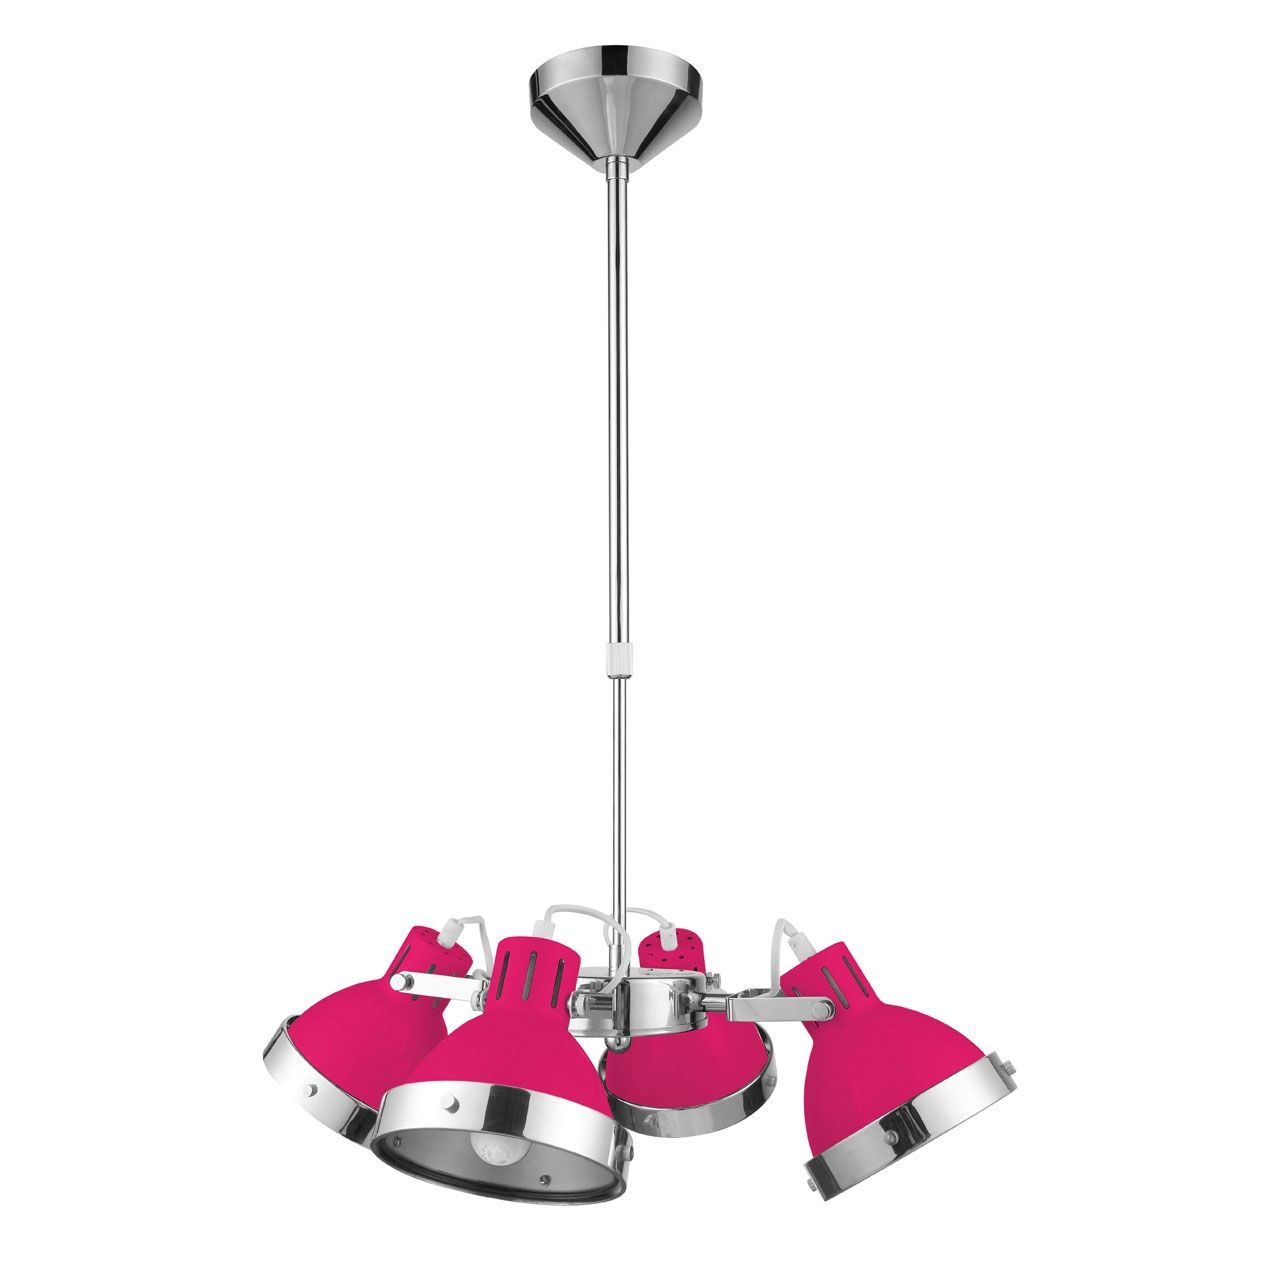 Hexon Contemporary 4 Metal Shades Ceiling Pendant Light In Pink And Chrome